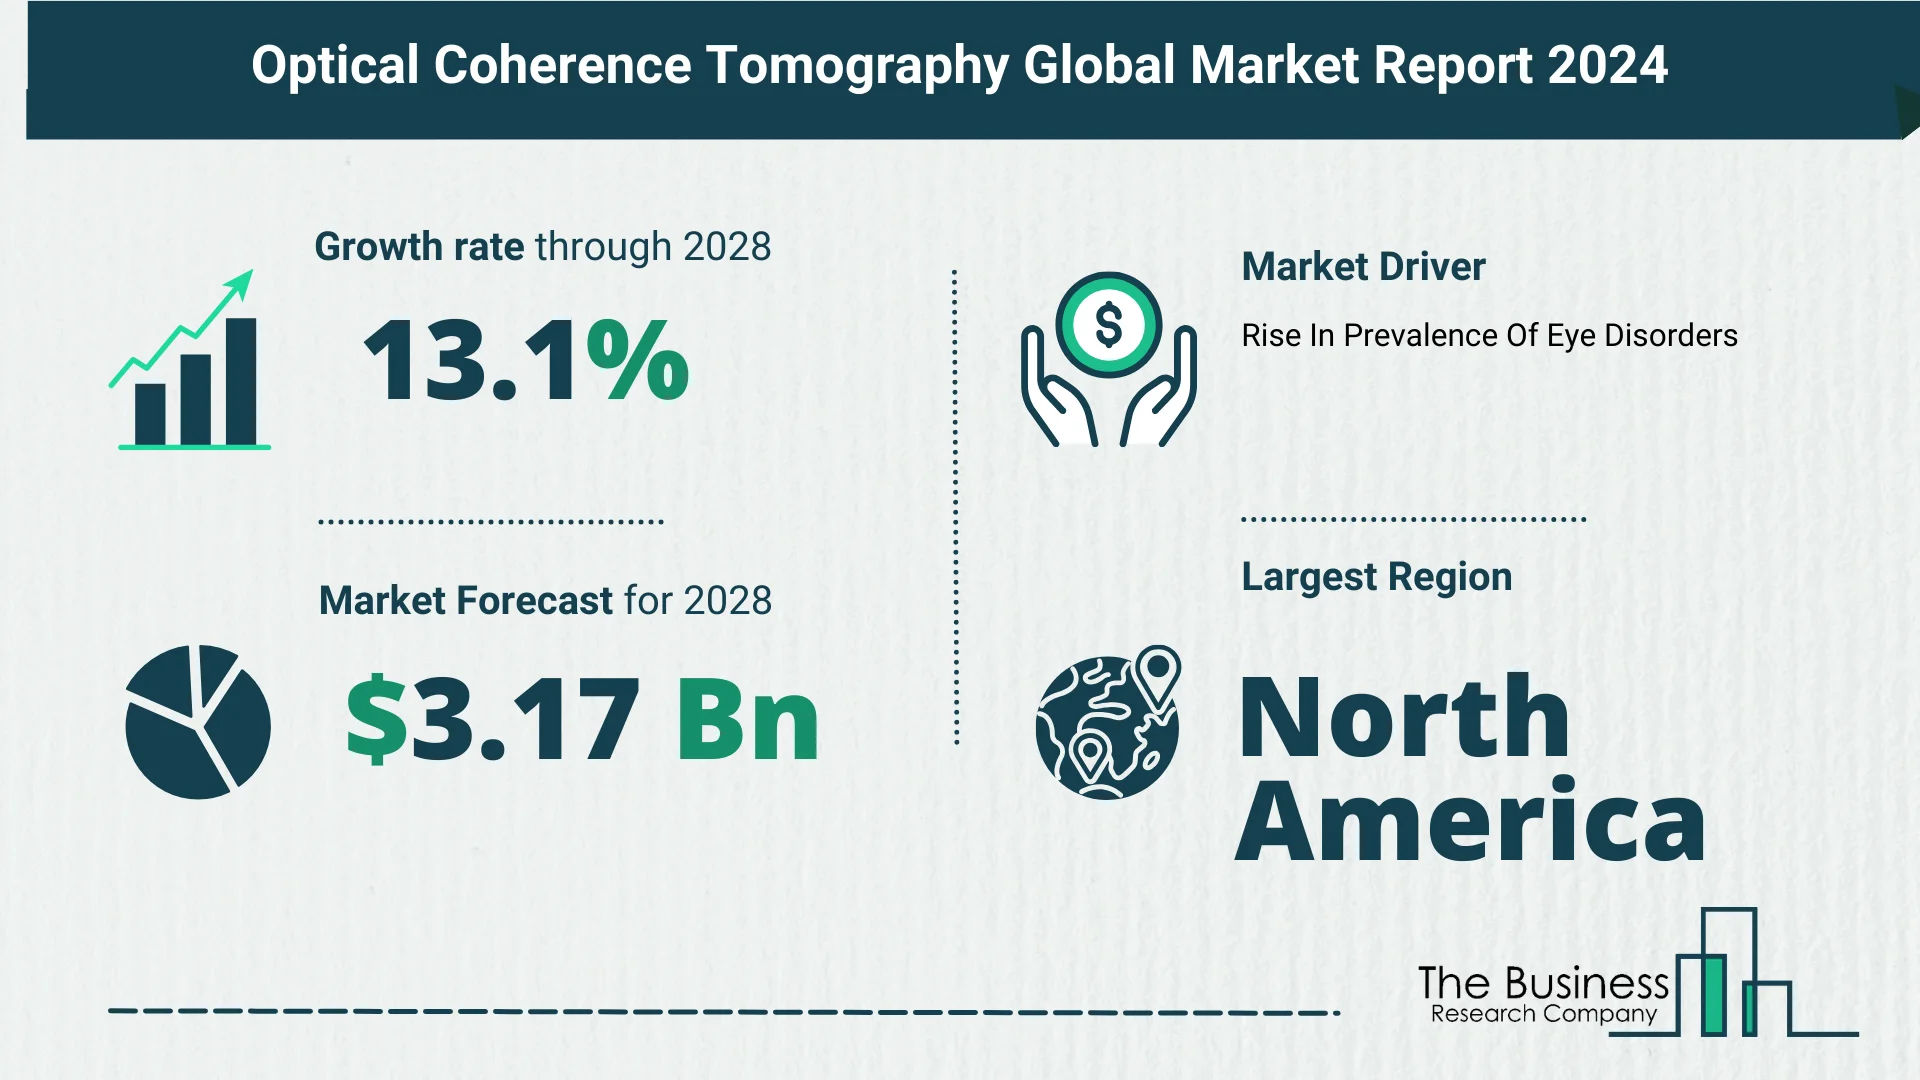 Top 5 Insights From The Optical Coherence Tomography Market Report 2024